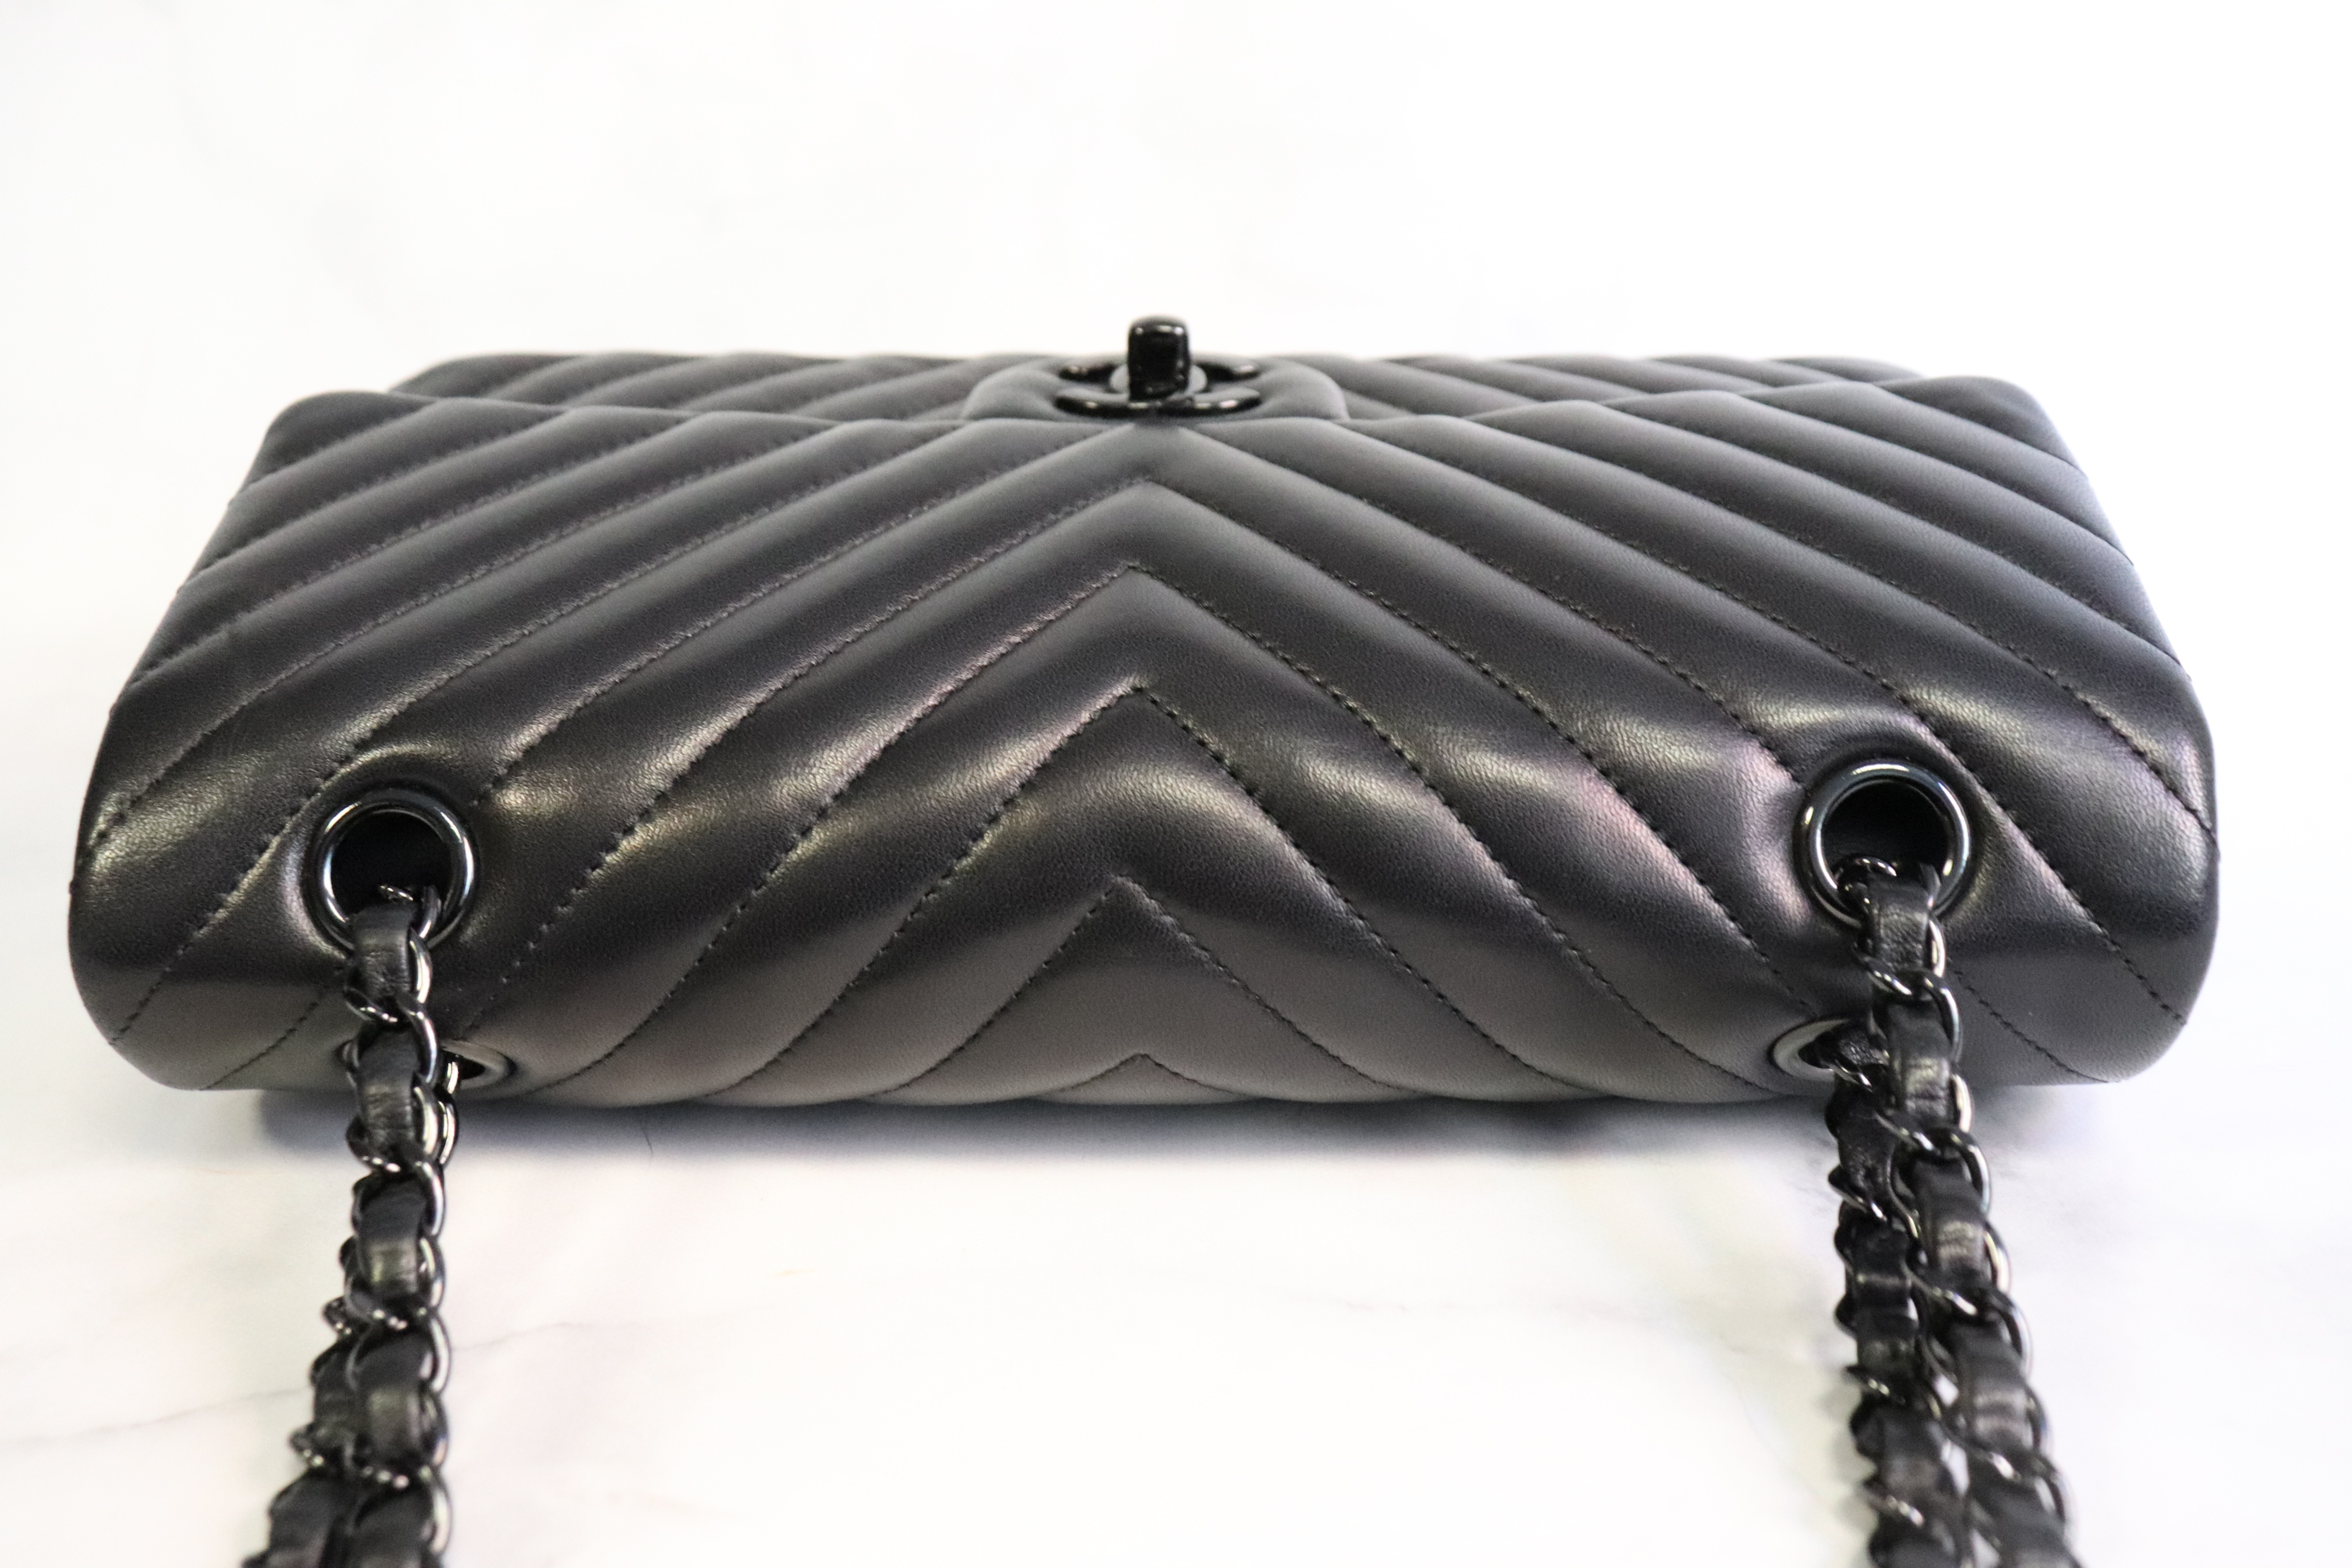 Chanel Classic Medium Double Flap, Black Lambskin Chevron Leather, So Black  Hardware, Preowned in Dustbag